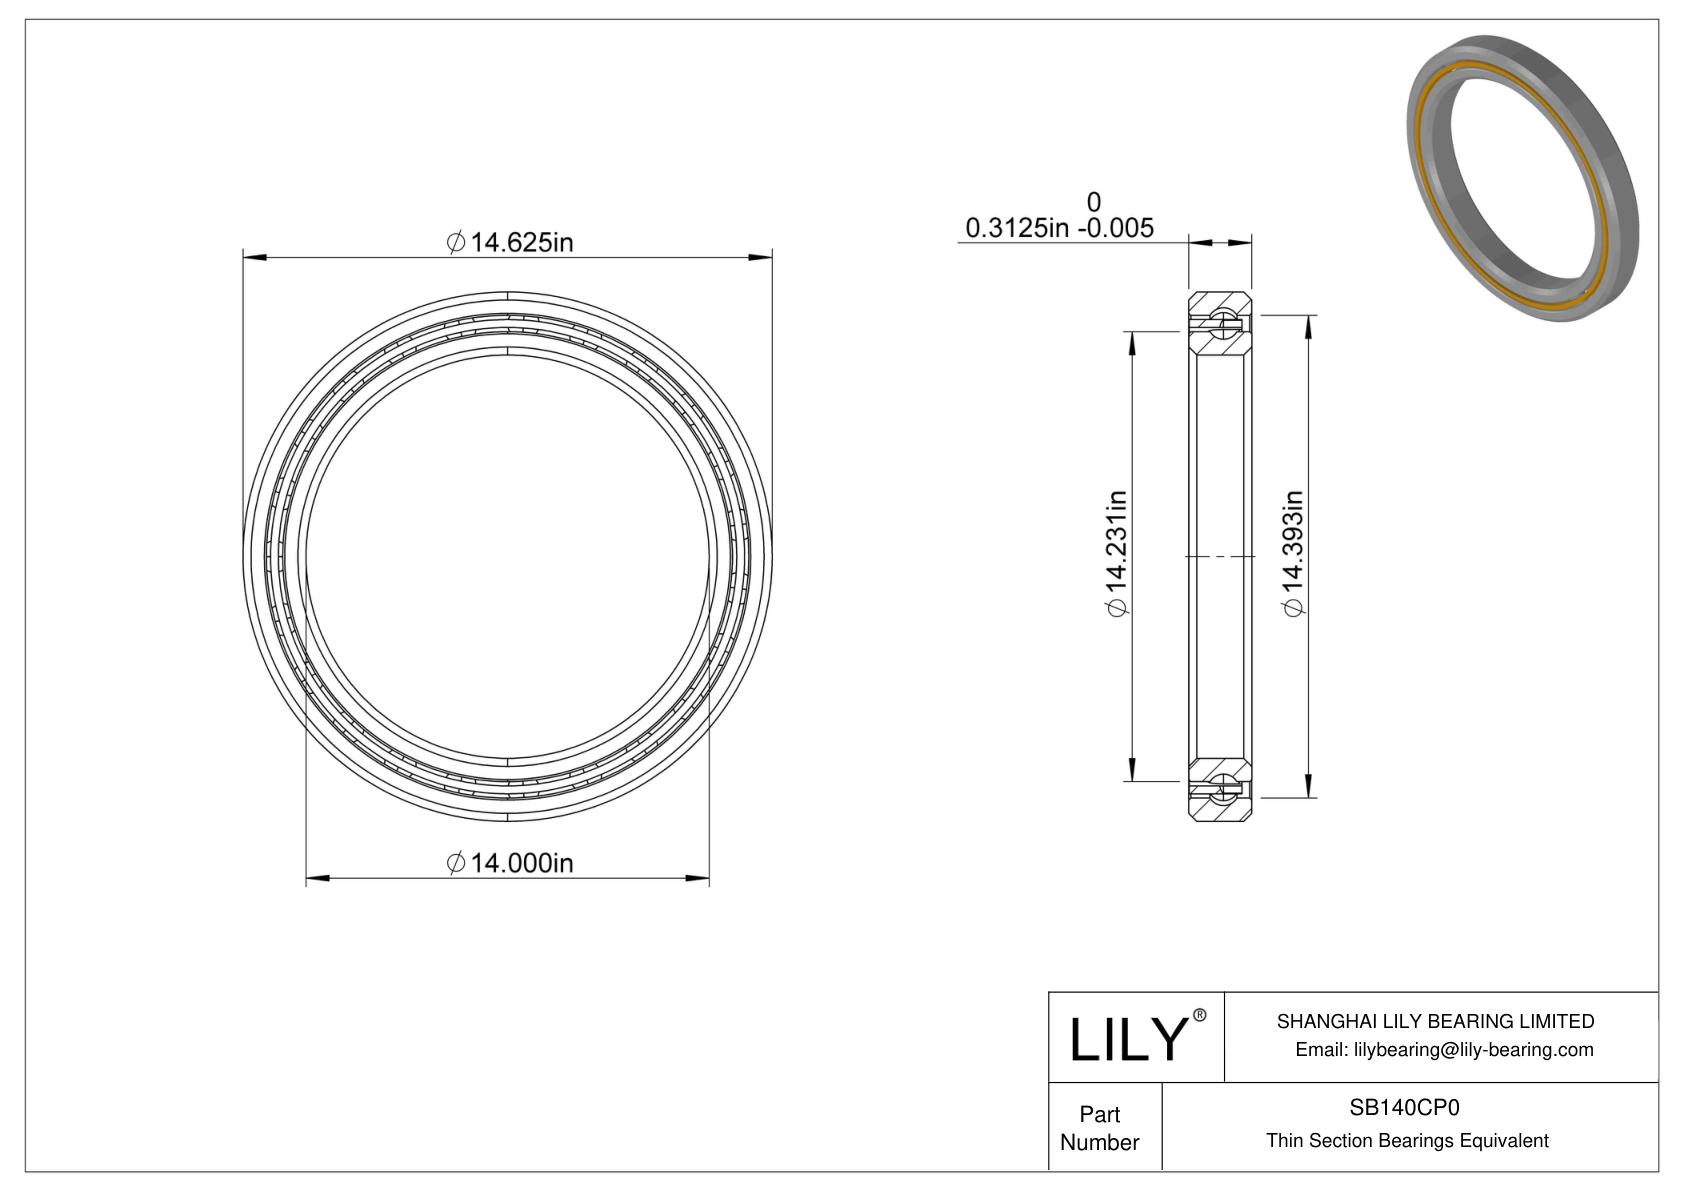 SB140CP0 Constant Section (CS) Bearings cad drawing